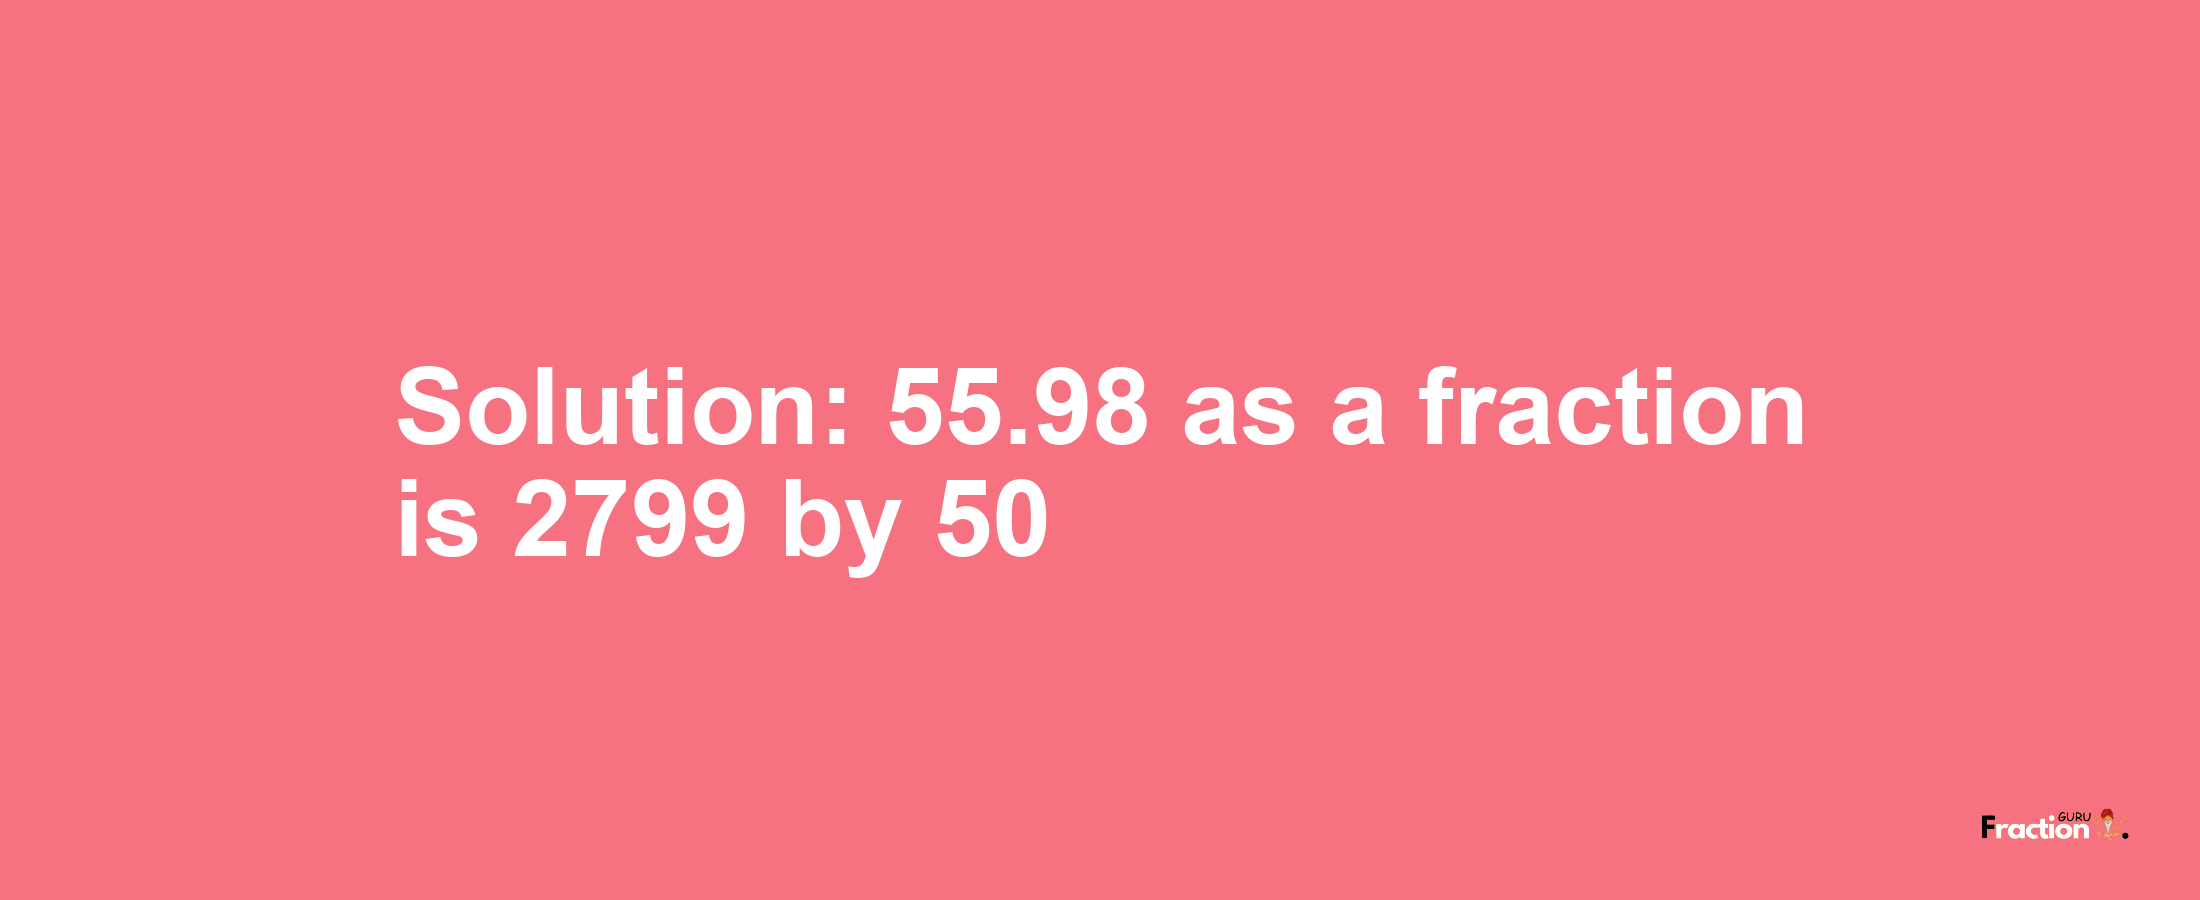 Solution:55.98 as a fraction is 2799/50